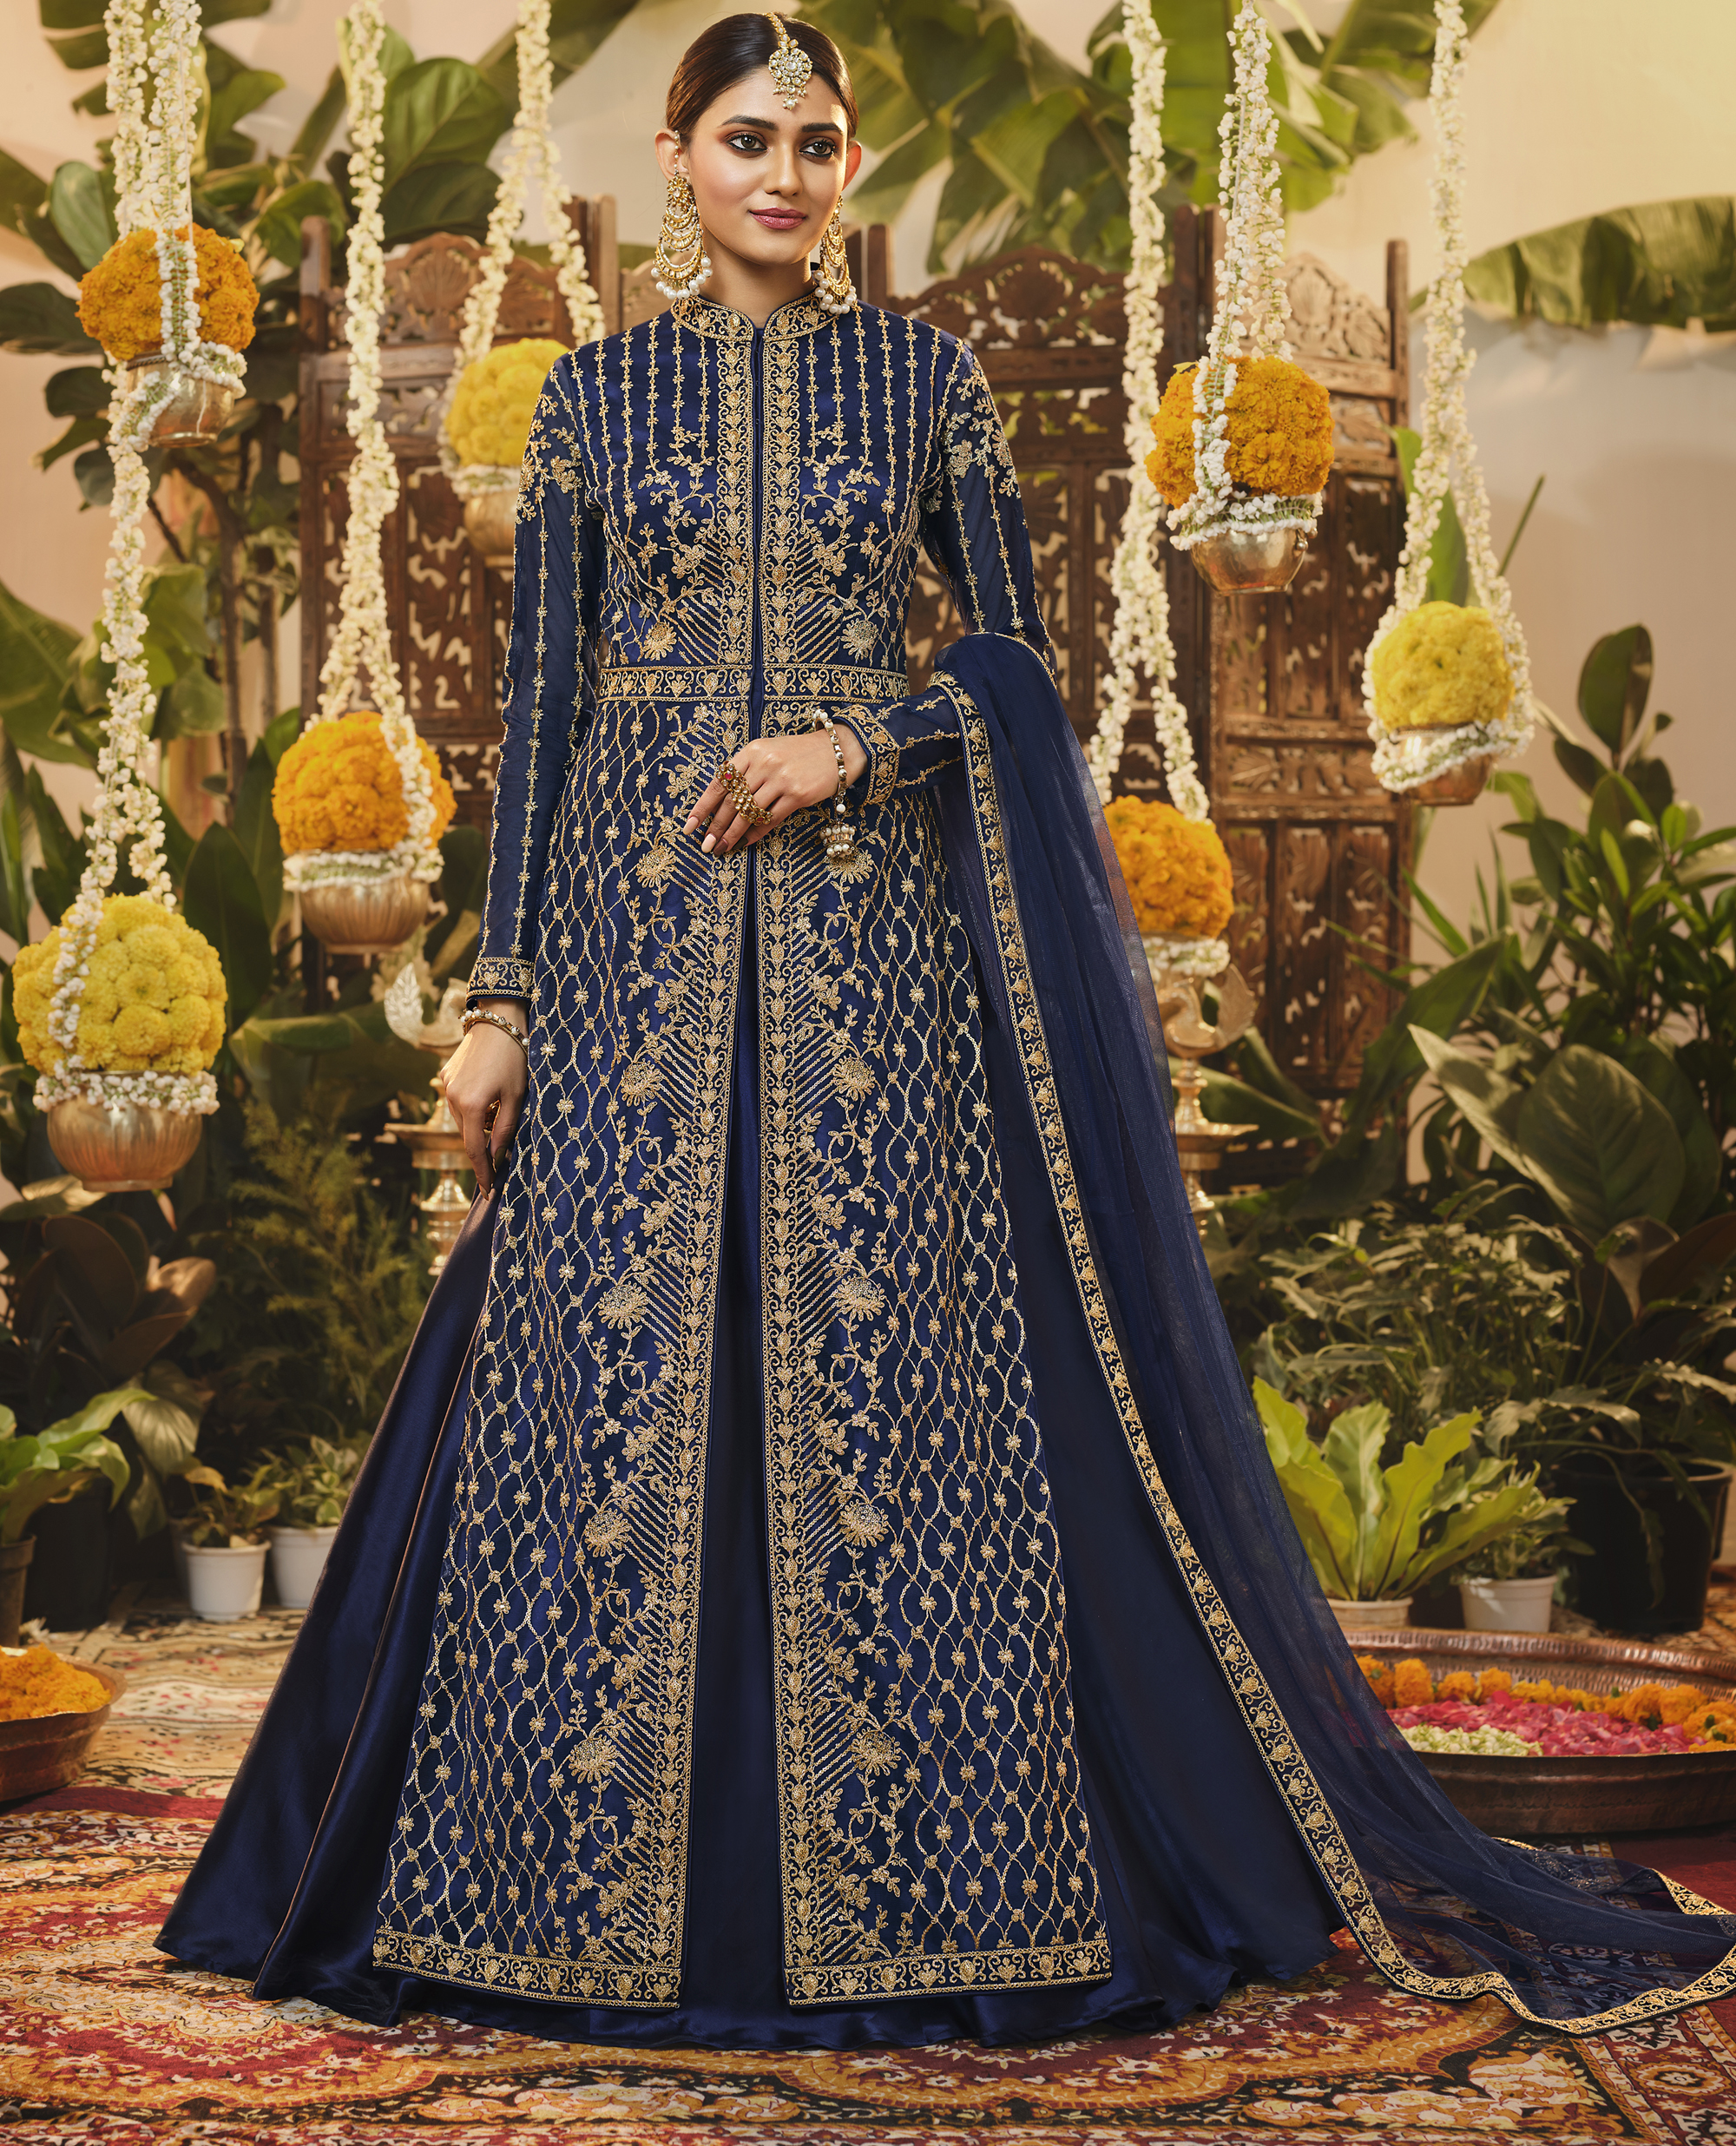 Day & Night: 5 Indian Wedding Reception Dresses For the Bride's Look Book